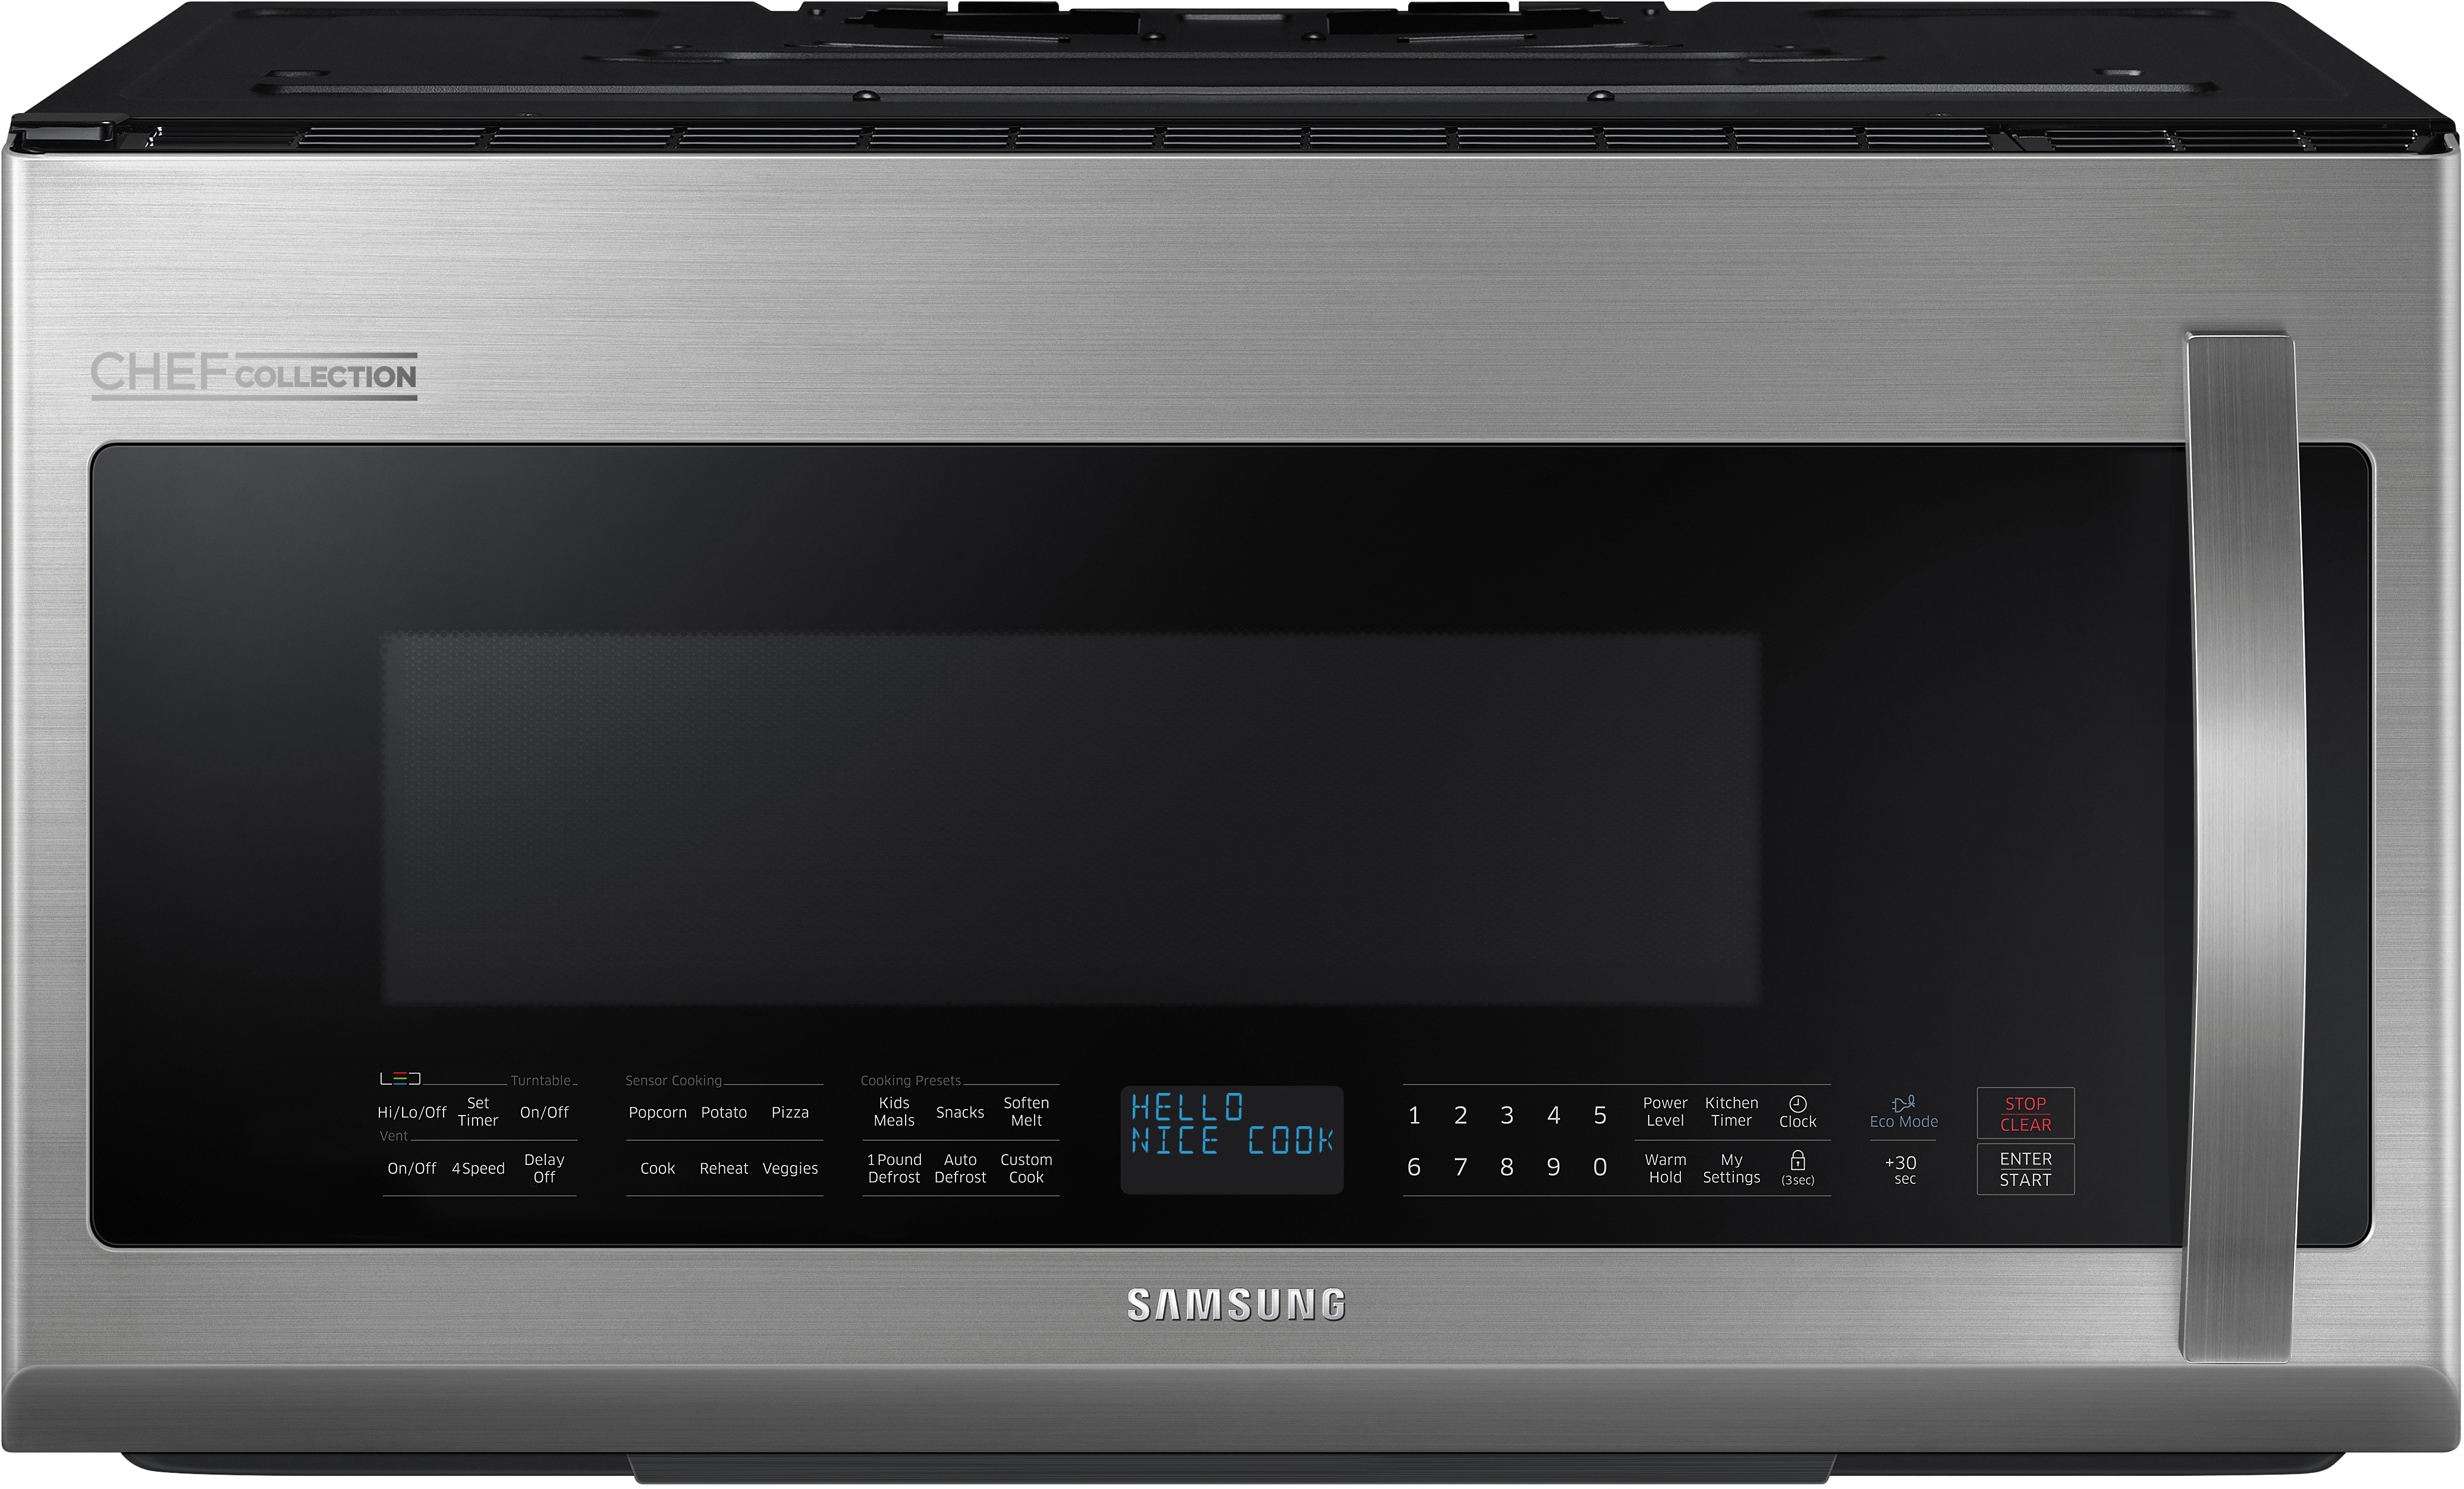 Jurassic Park onderdelen Fitness Samsung ME21H9900AS 2.1 cu. ft. Over-the-Range Microwave Oven with 1000  Watts, 10 Power Levels, 430 CFM Venting System, Pro-Clean Filter, Sensor  Cook Technology, Ceramic Enamel Interior, Glass Turntable, Bottom Controls  and LED